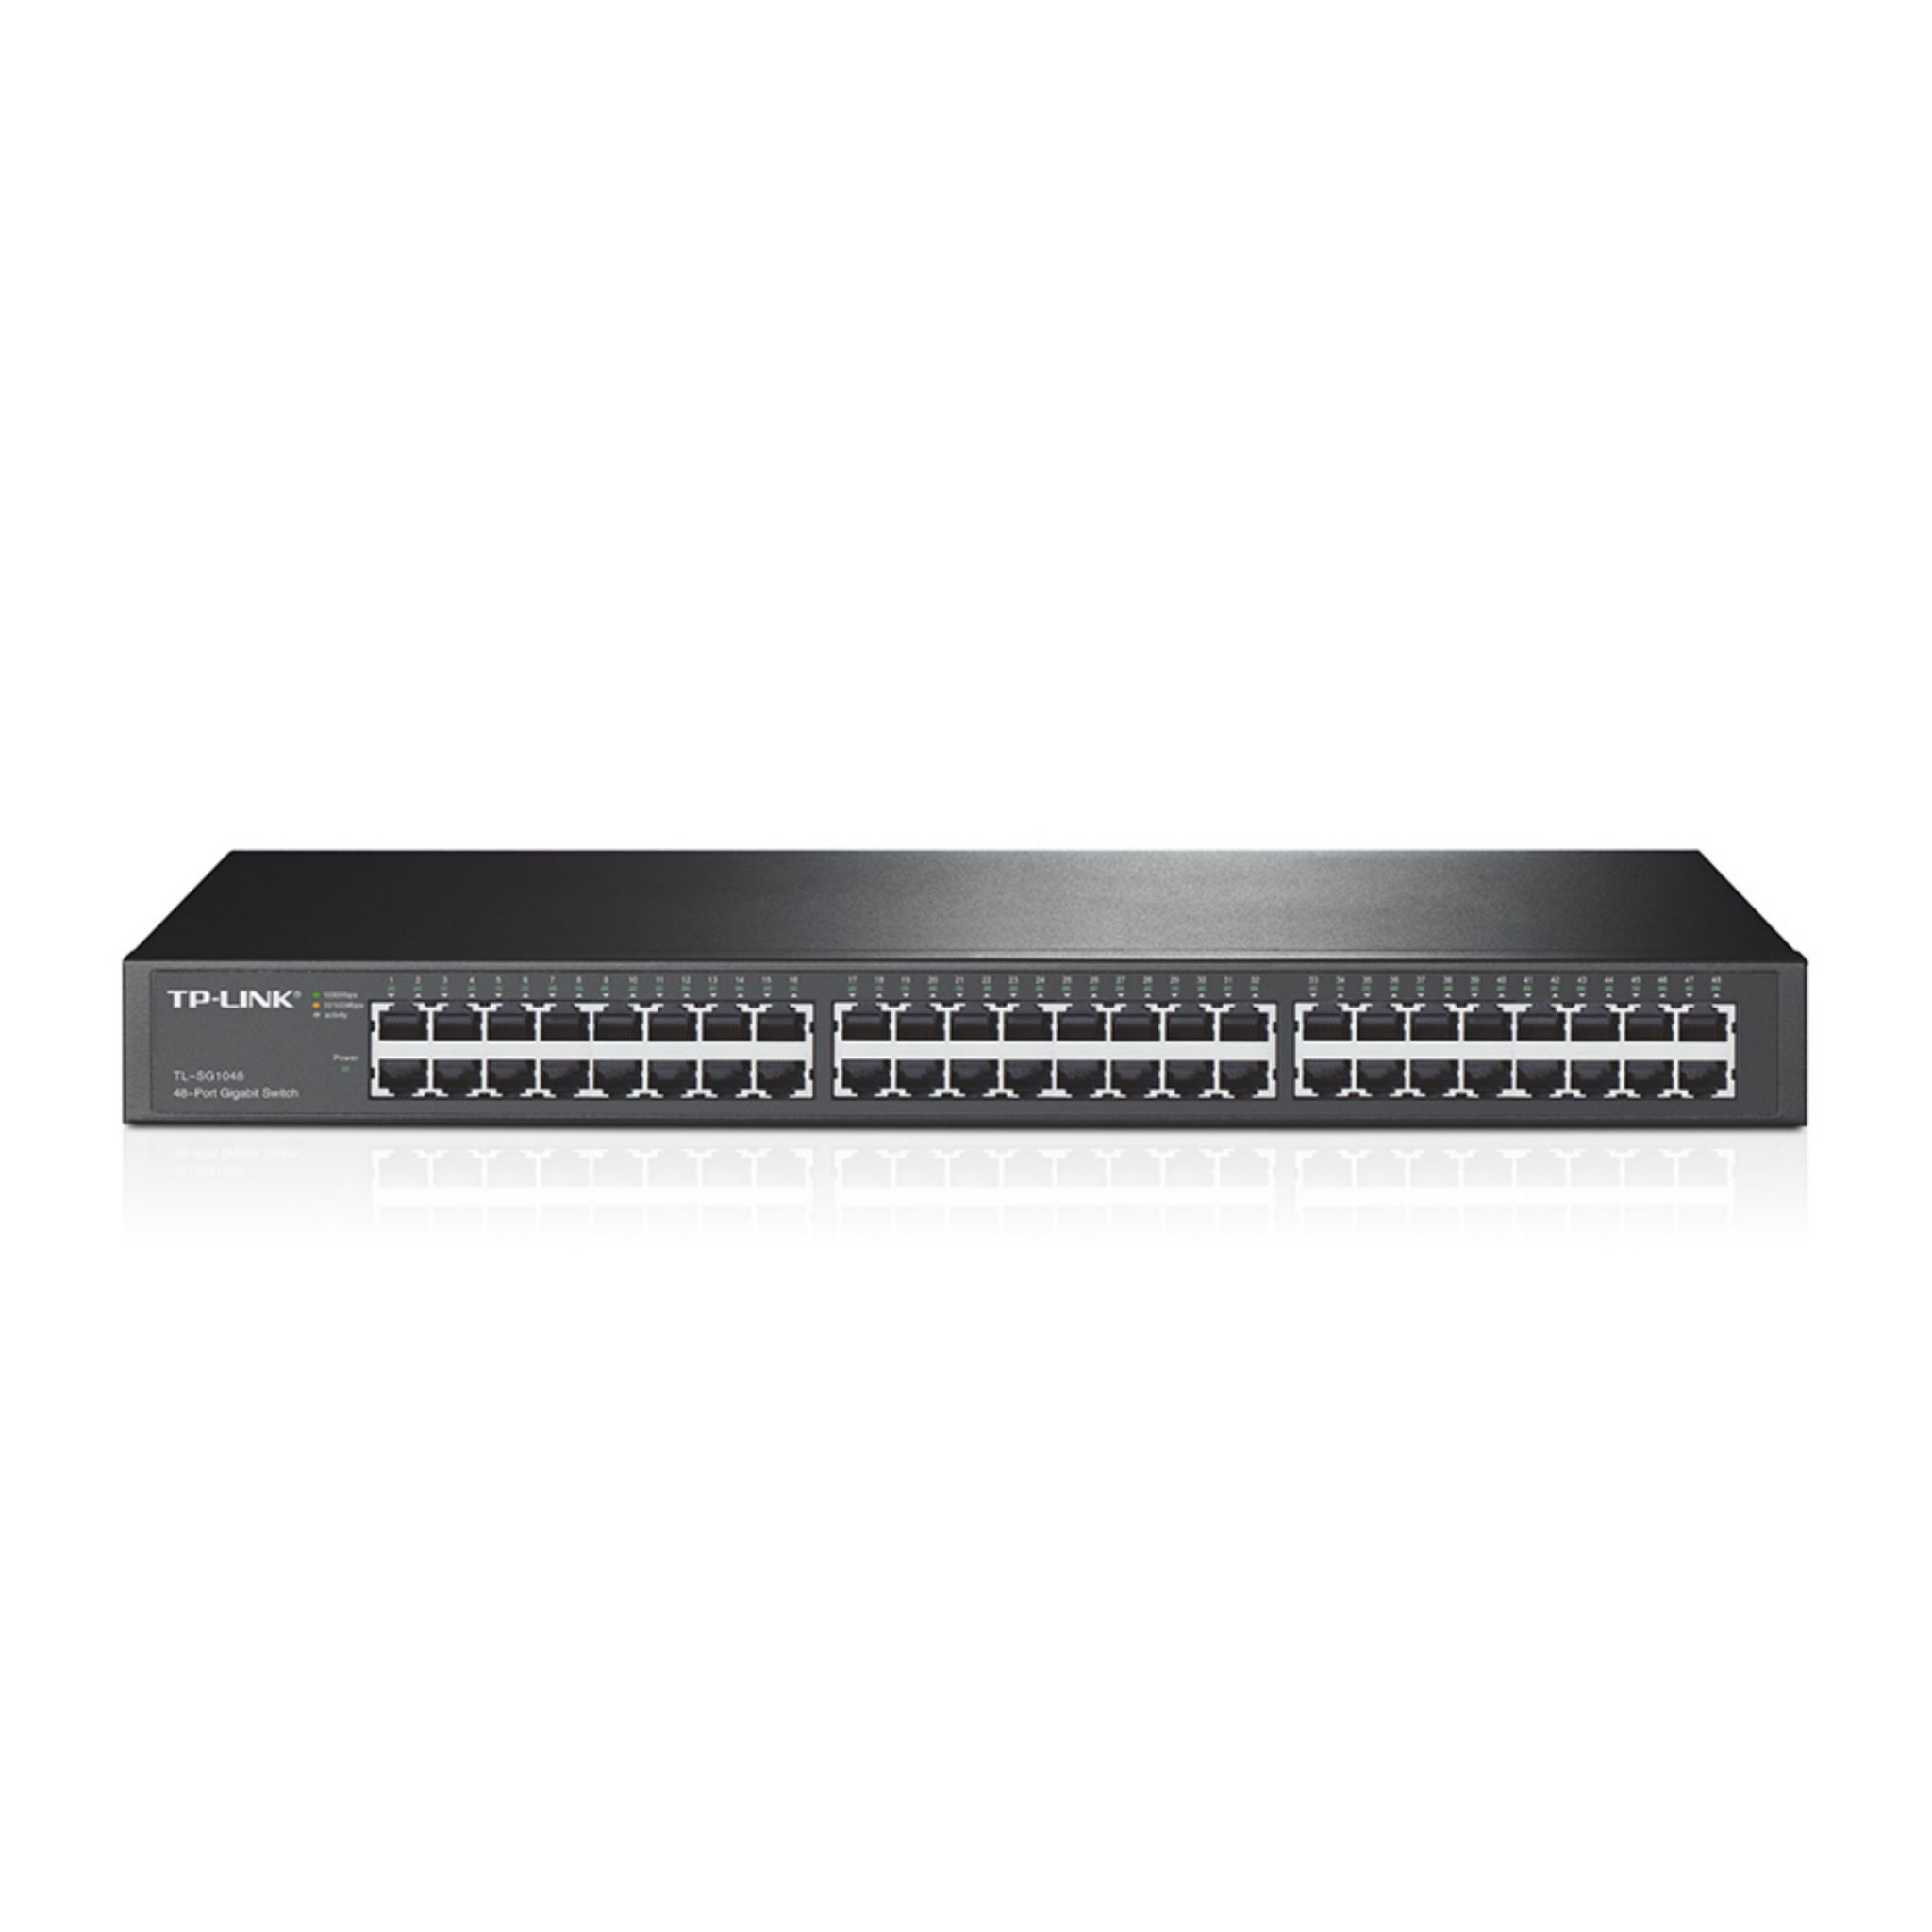 TP-LINK TL-SG1048 48-Port-Gigabit-Rackmount-Switch 48 unmanaged Switches